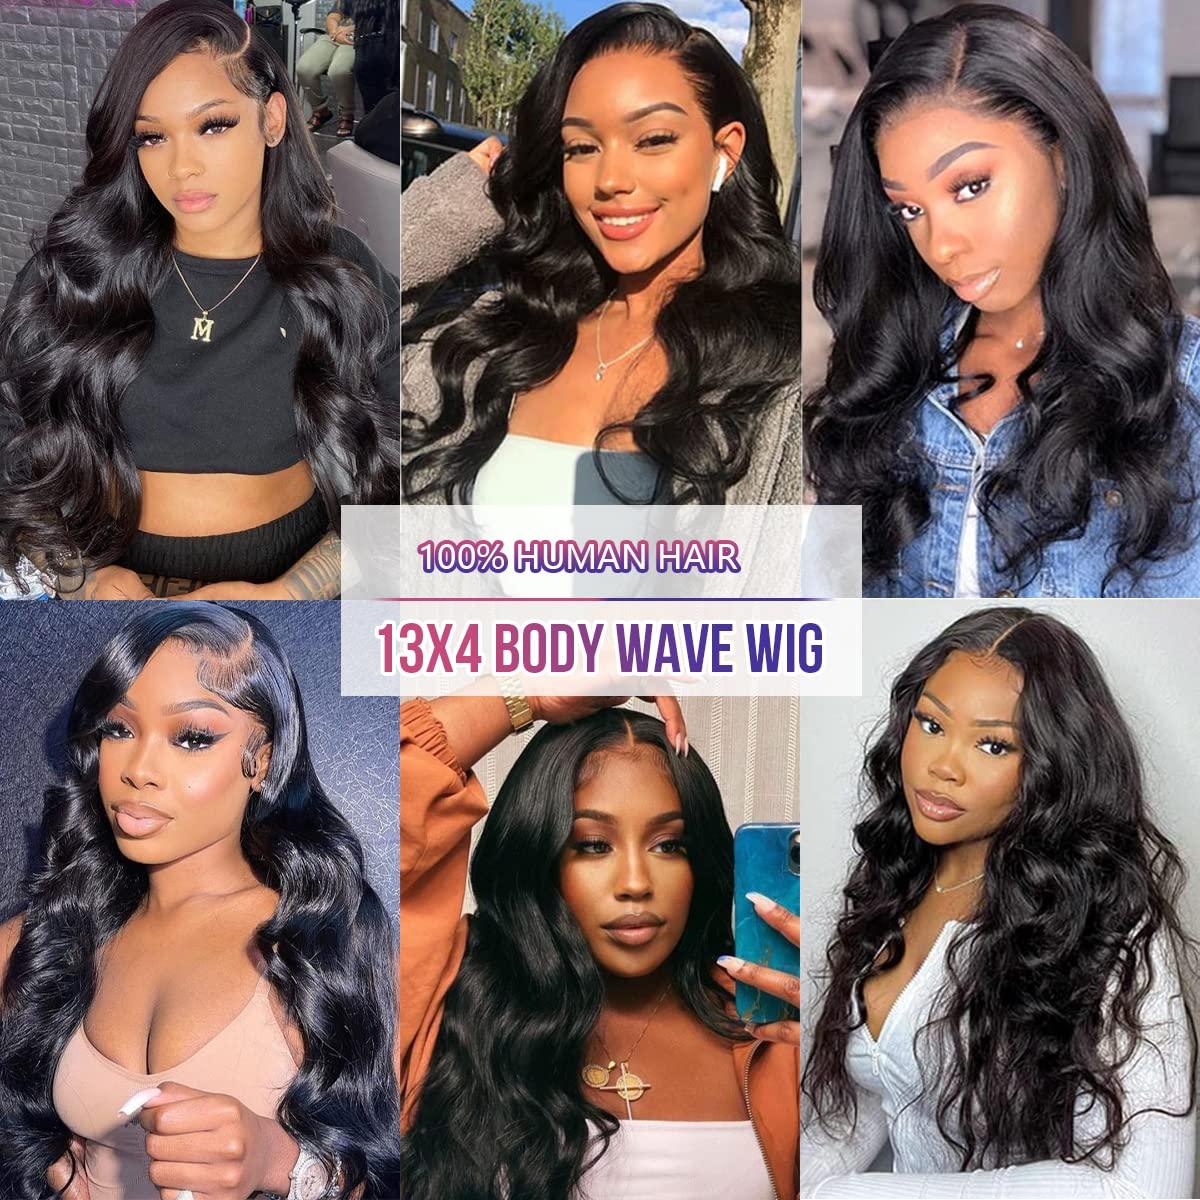 Beautyforever Body Wave 13X4 Lace Front Wigs Pre-plucked Human